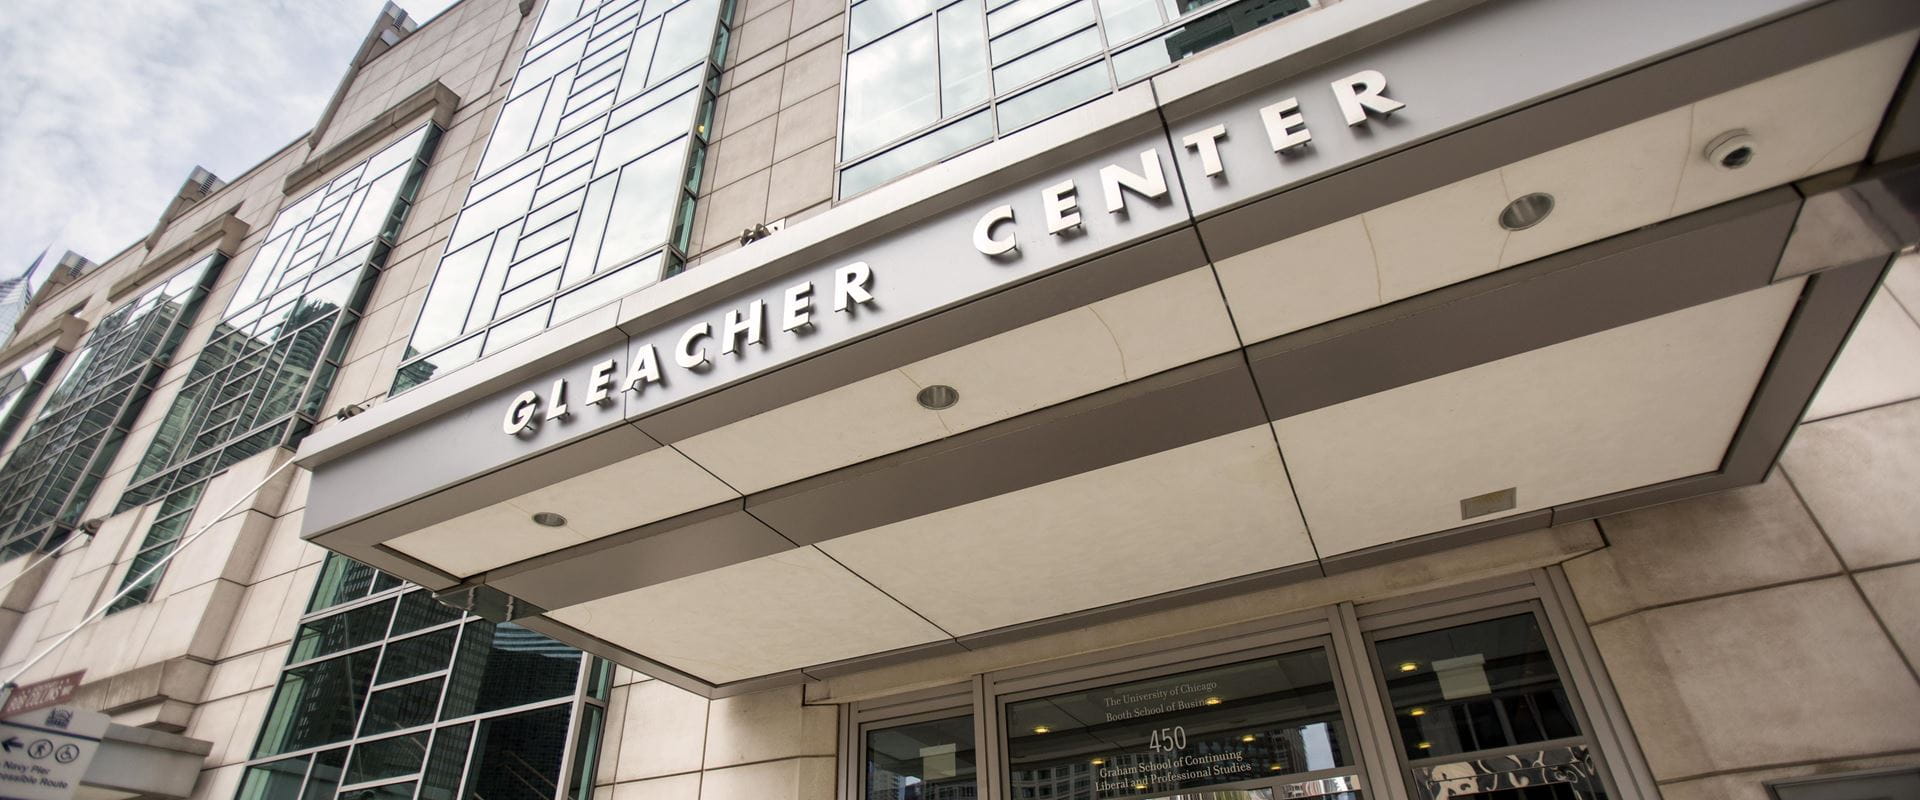 Gleacher Center  The University of Chicago Booth School of Business